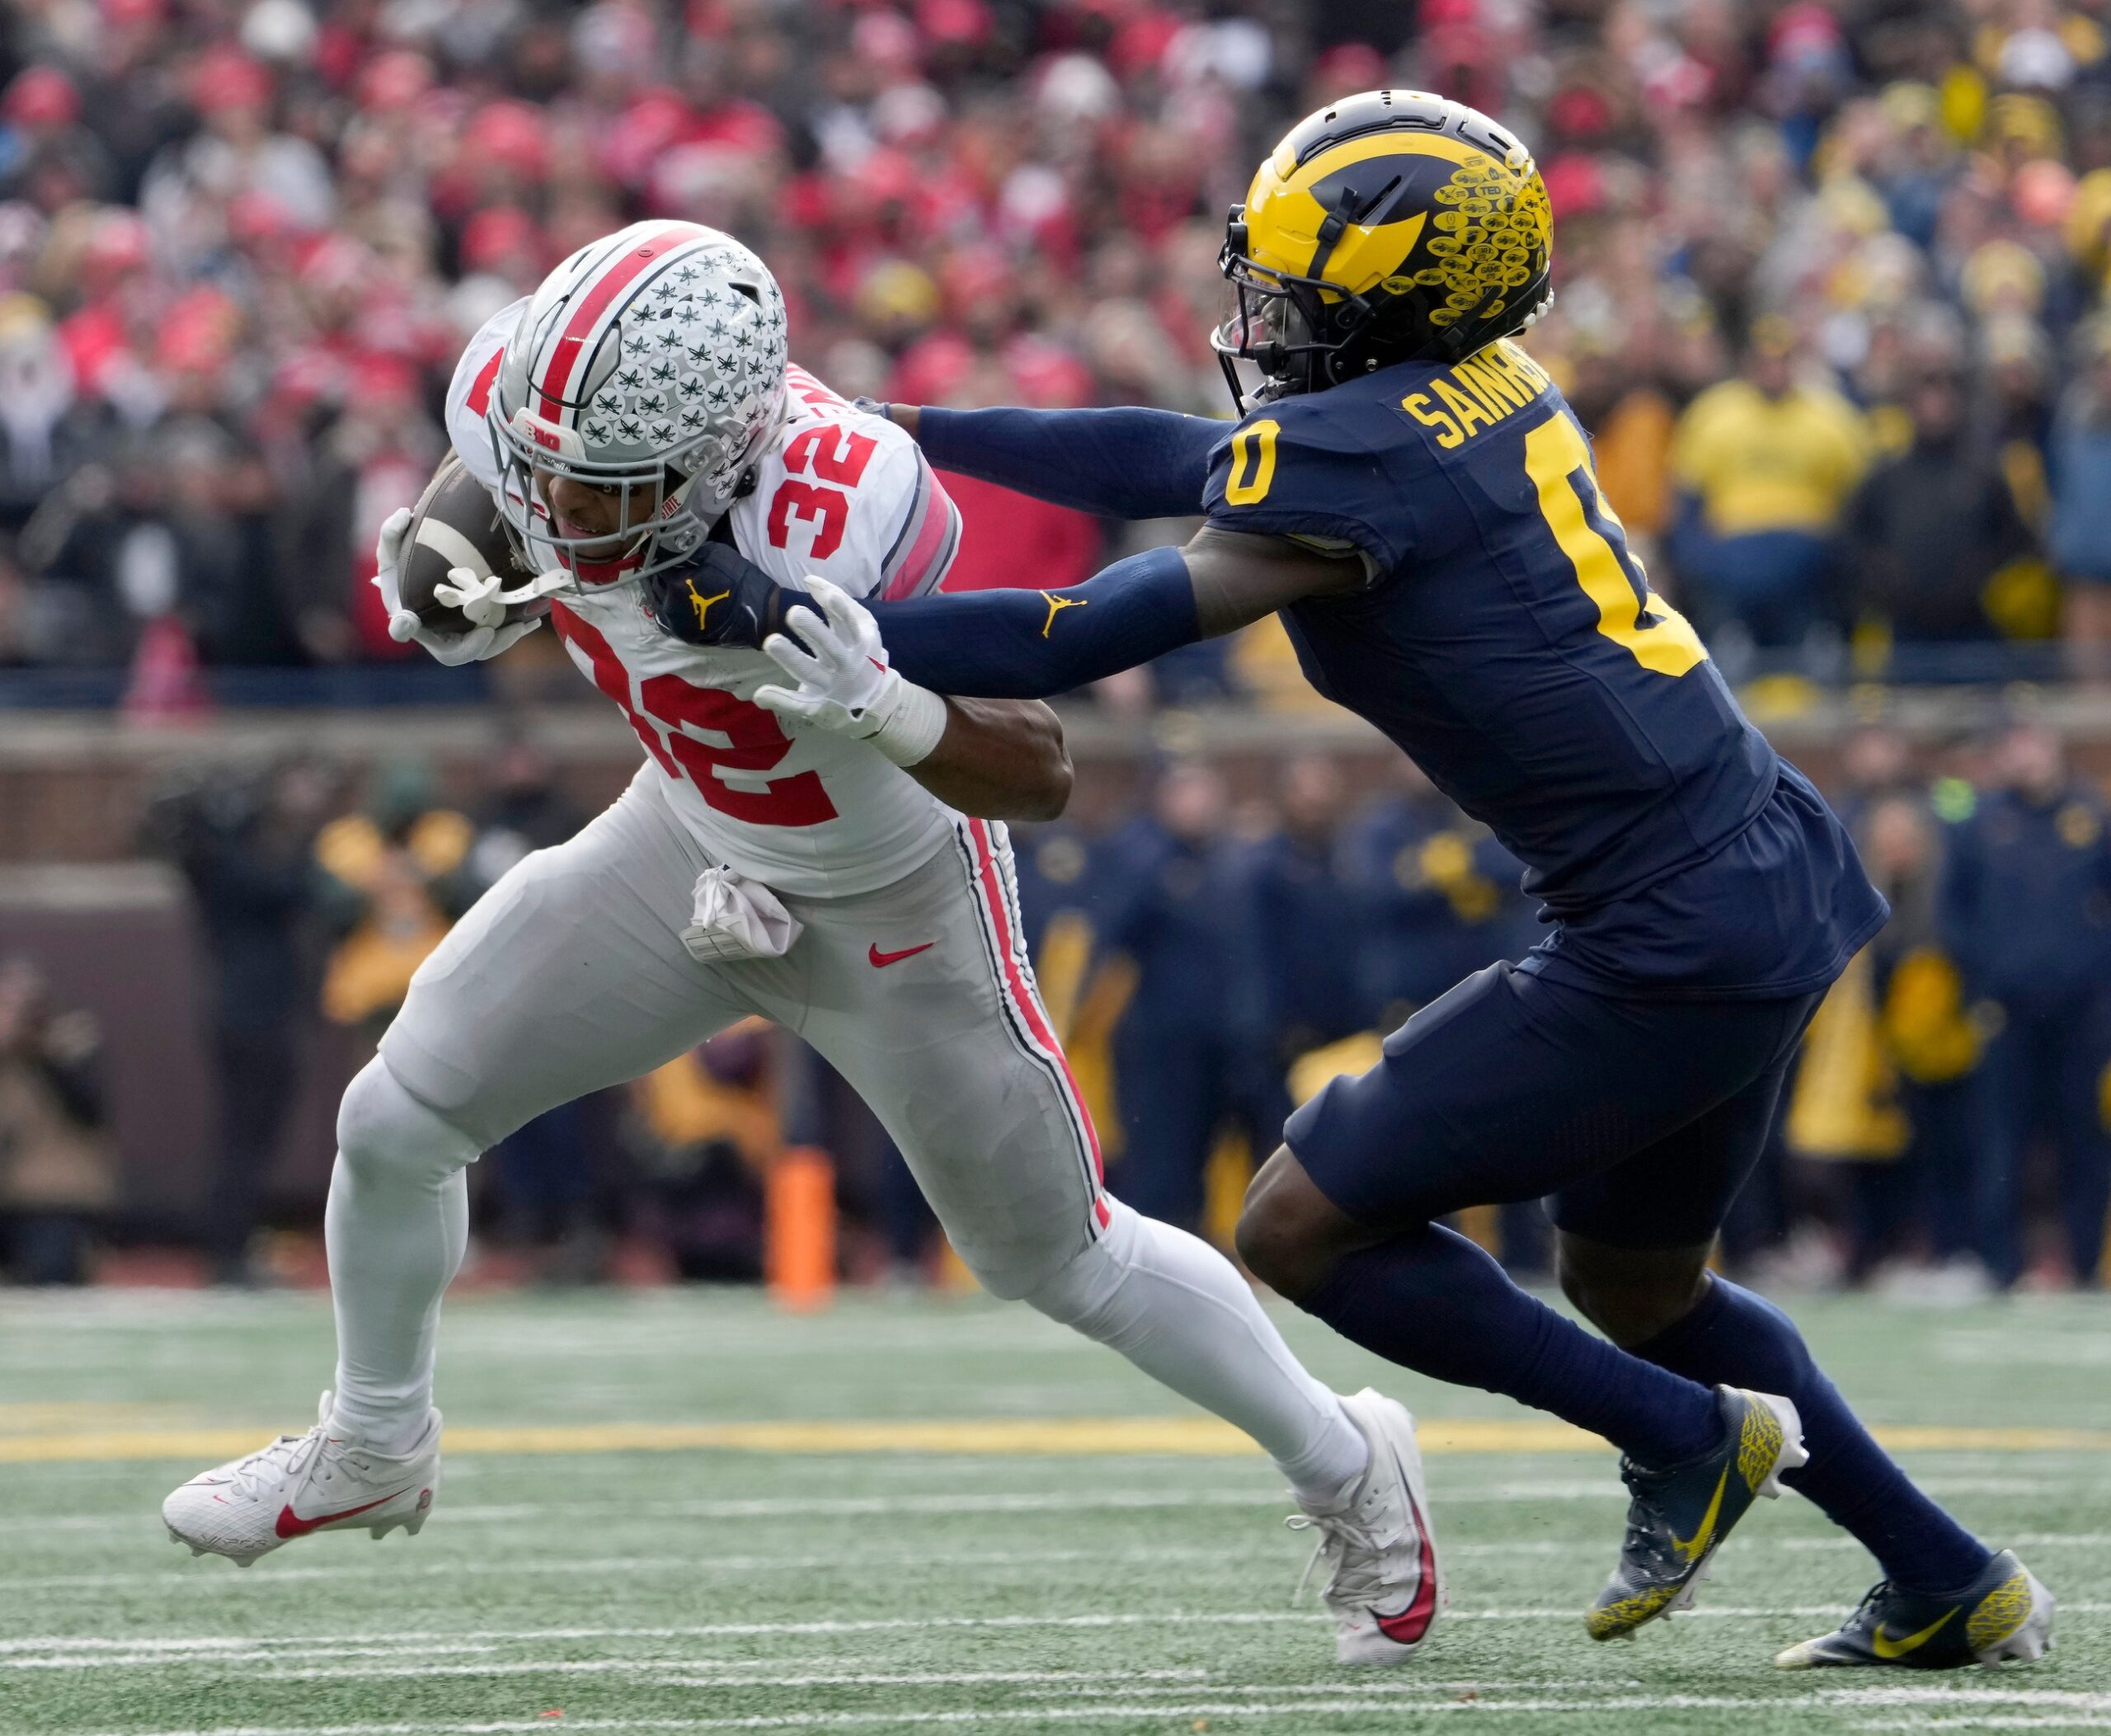 Ohio State Fans Cry Foul Over Loss To Michigan